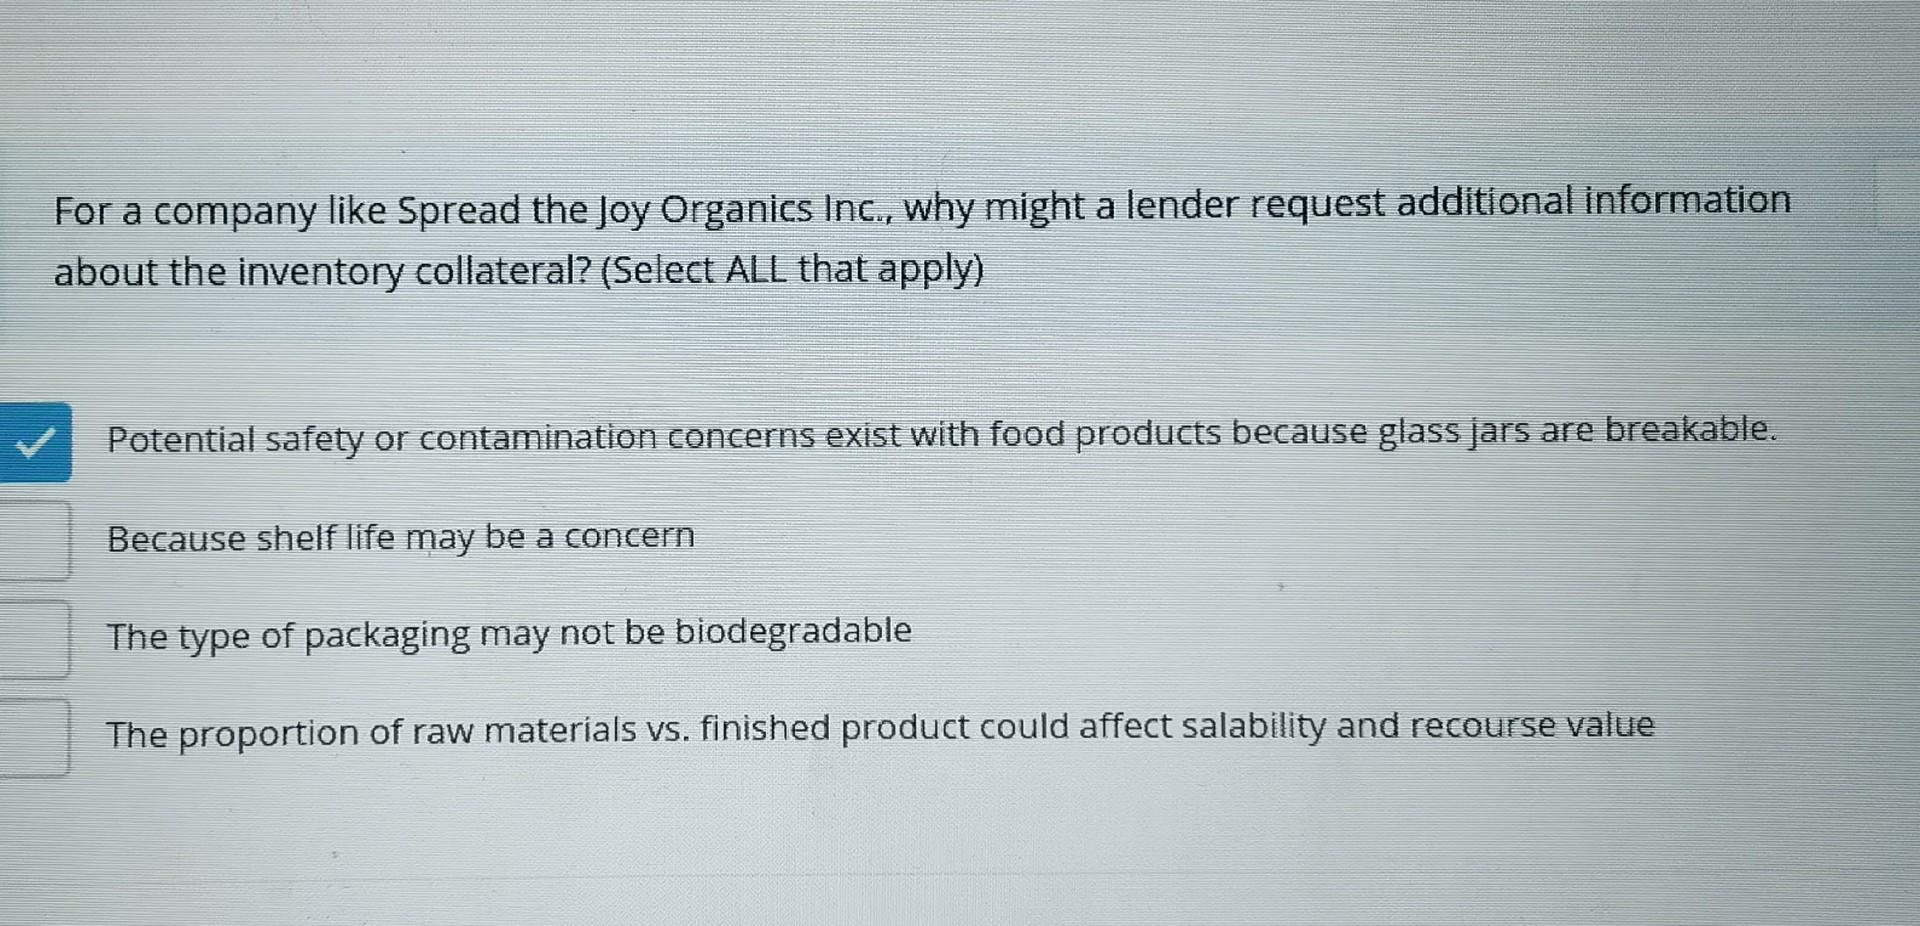 For a company like Spread the Joy Organics Inc., why might a lender request additional information about the